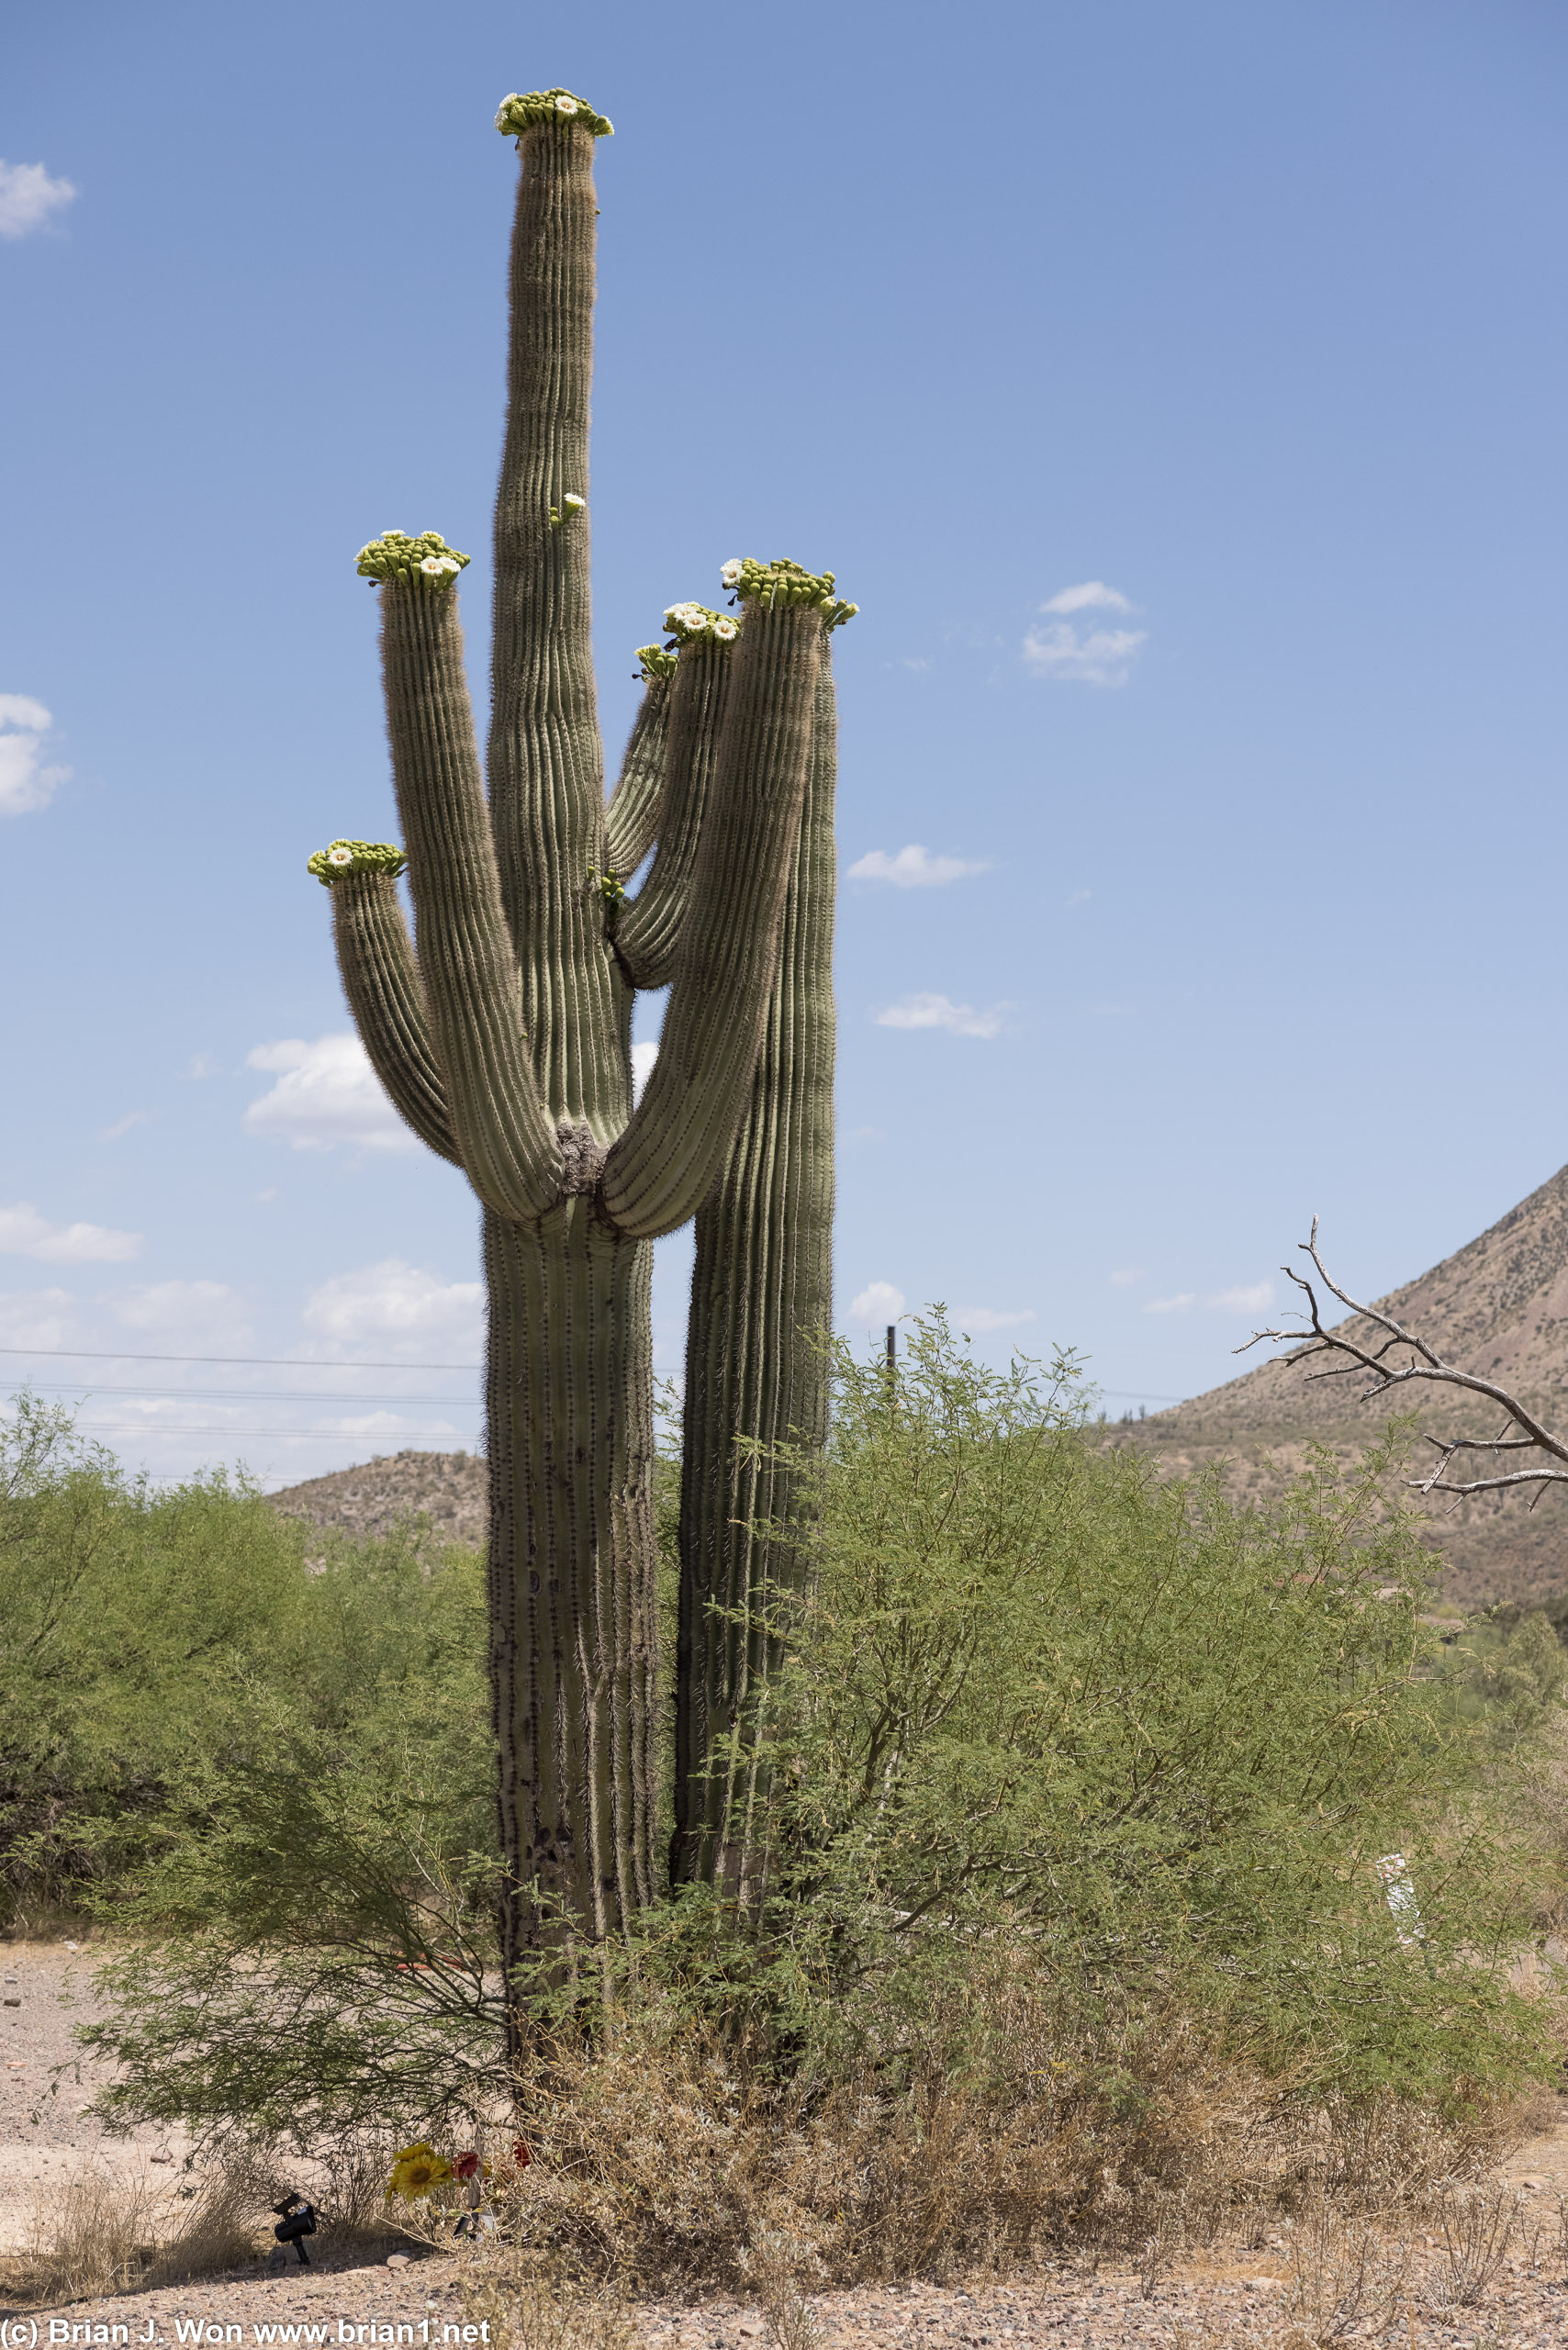 Heading south back to Phoenix means back to saguaro cactus territory.